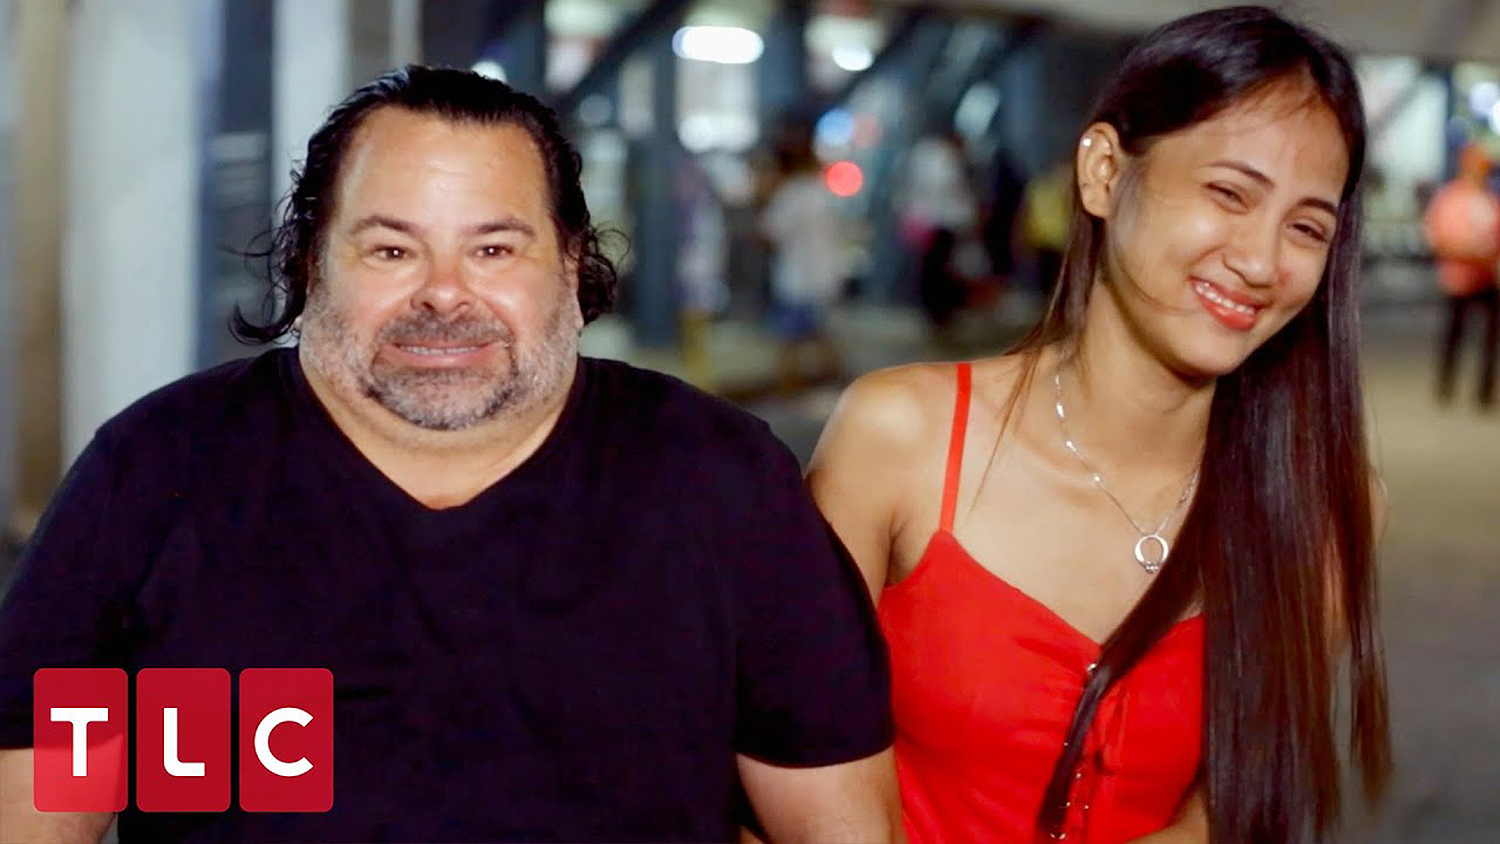 Big Ed 90 Day Fiance with his fiance Rose